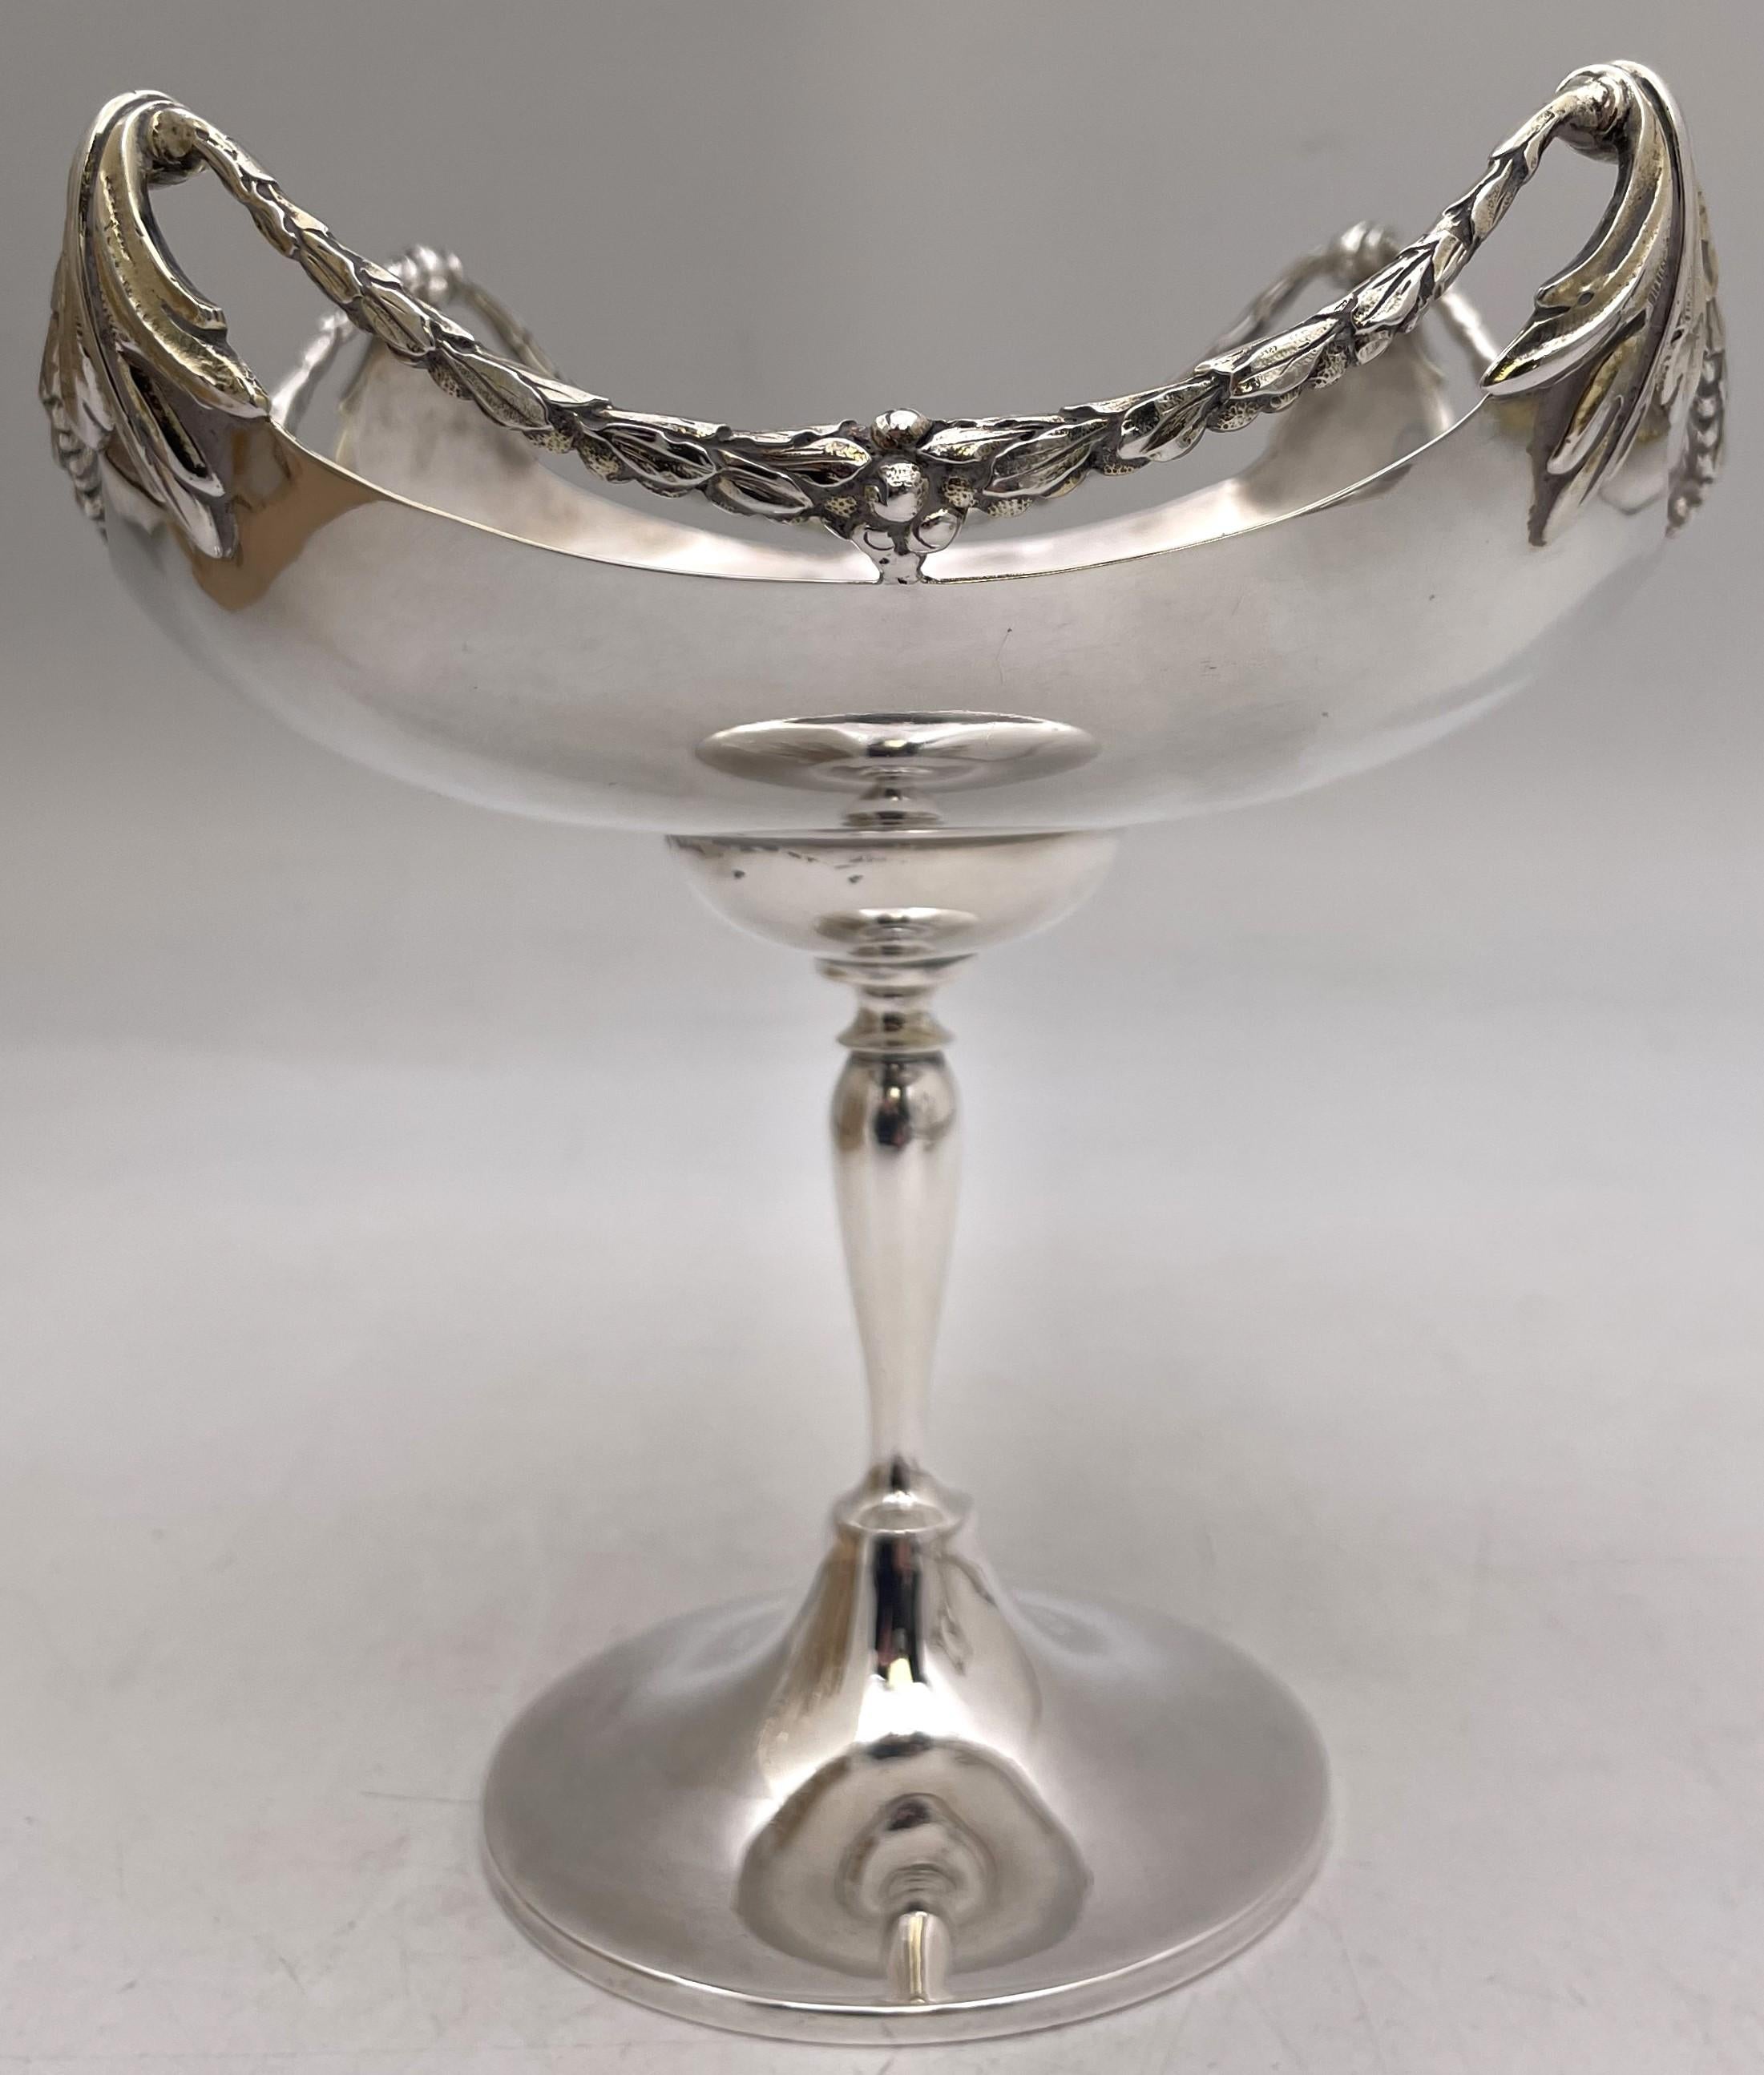 English Pair of Goldsmiths & Silversmiths Sterling Silver 1910 Compotes or Footed Bowls For Sale